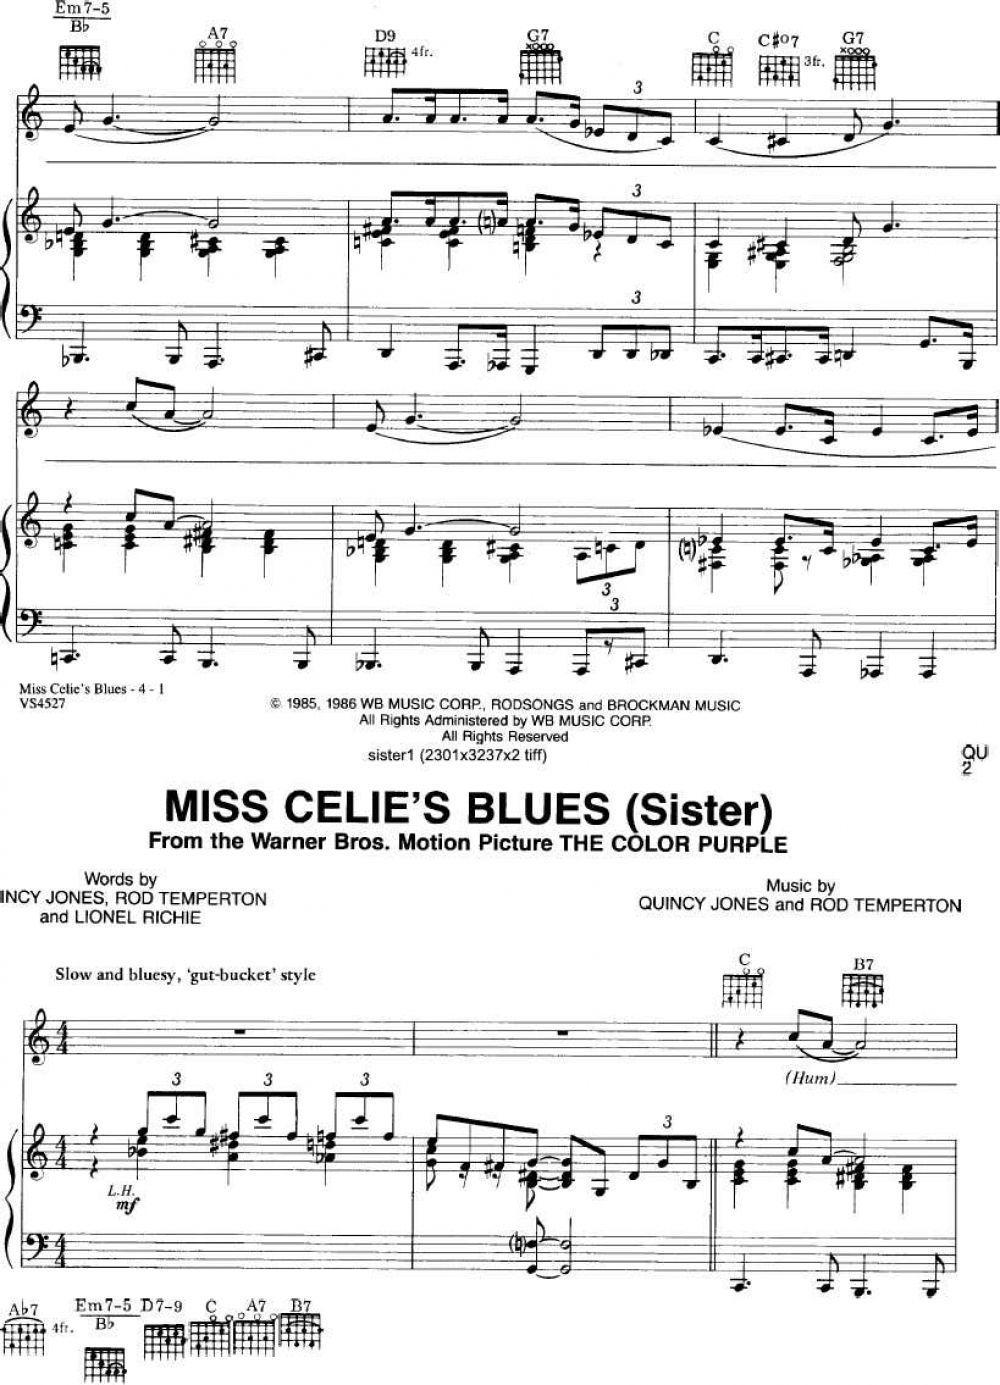 Quincy Jones - Miss Celie's Blues (Sister) Sheet Music for Piano | Free ...